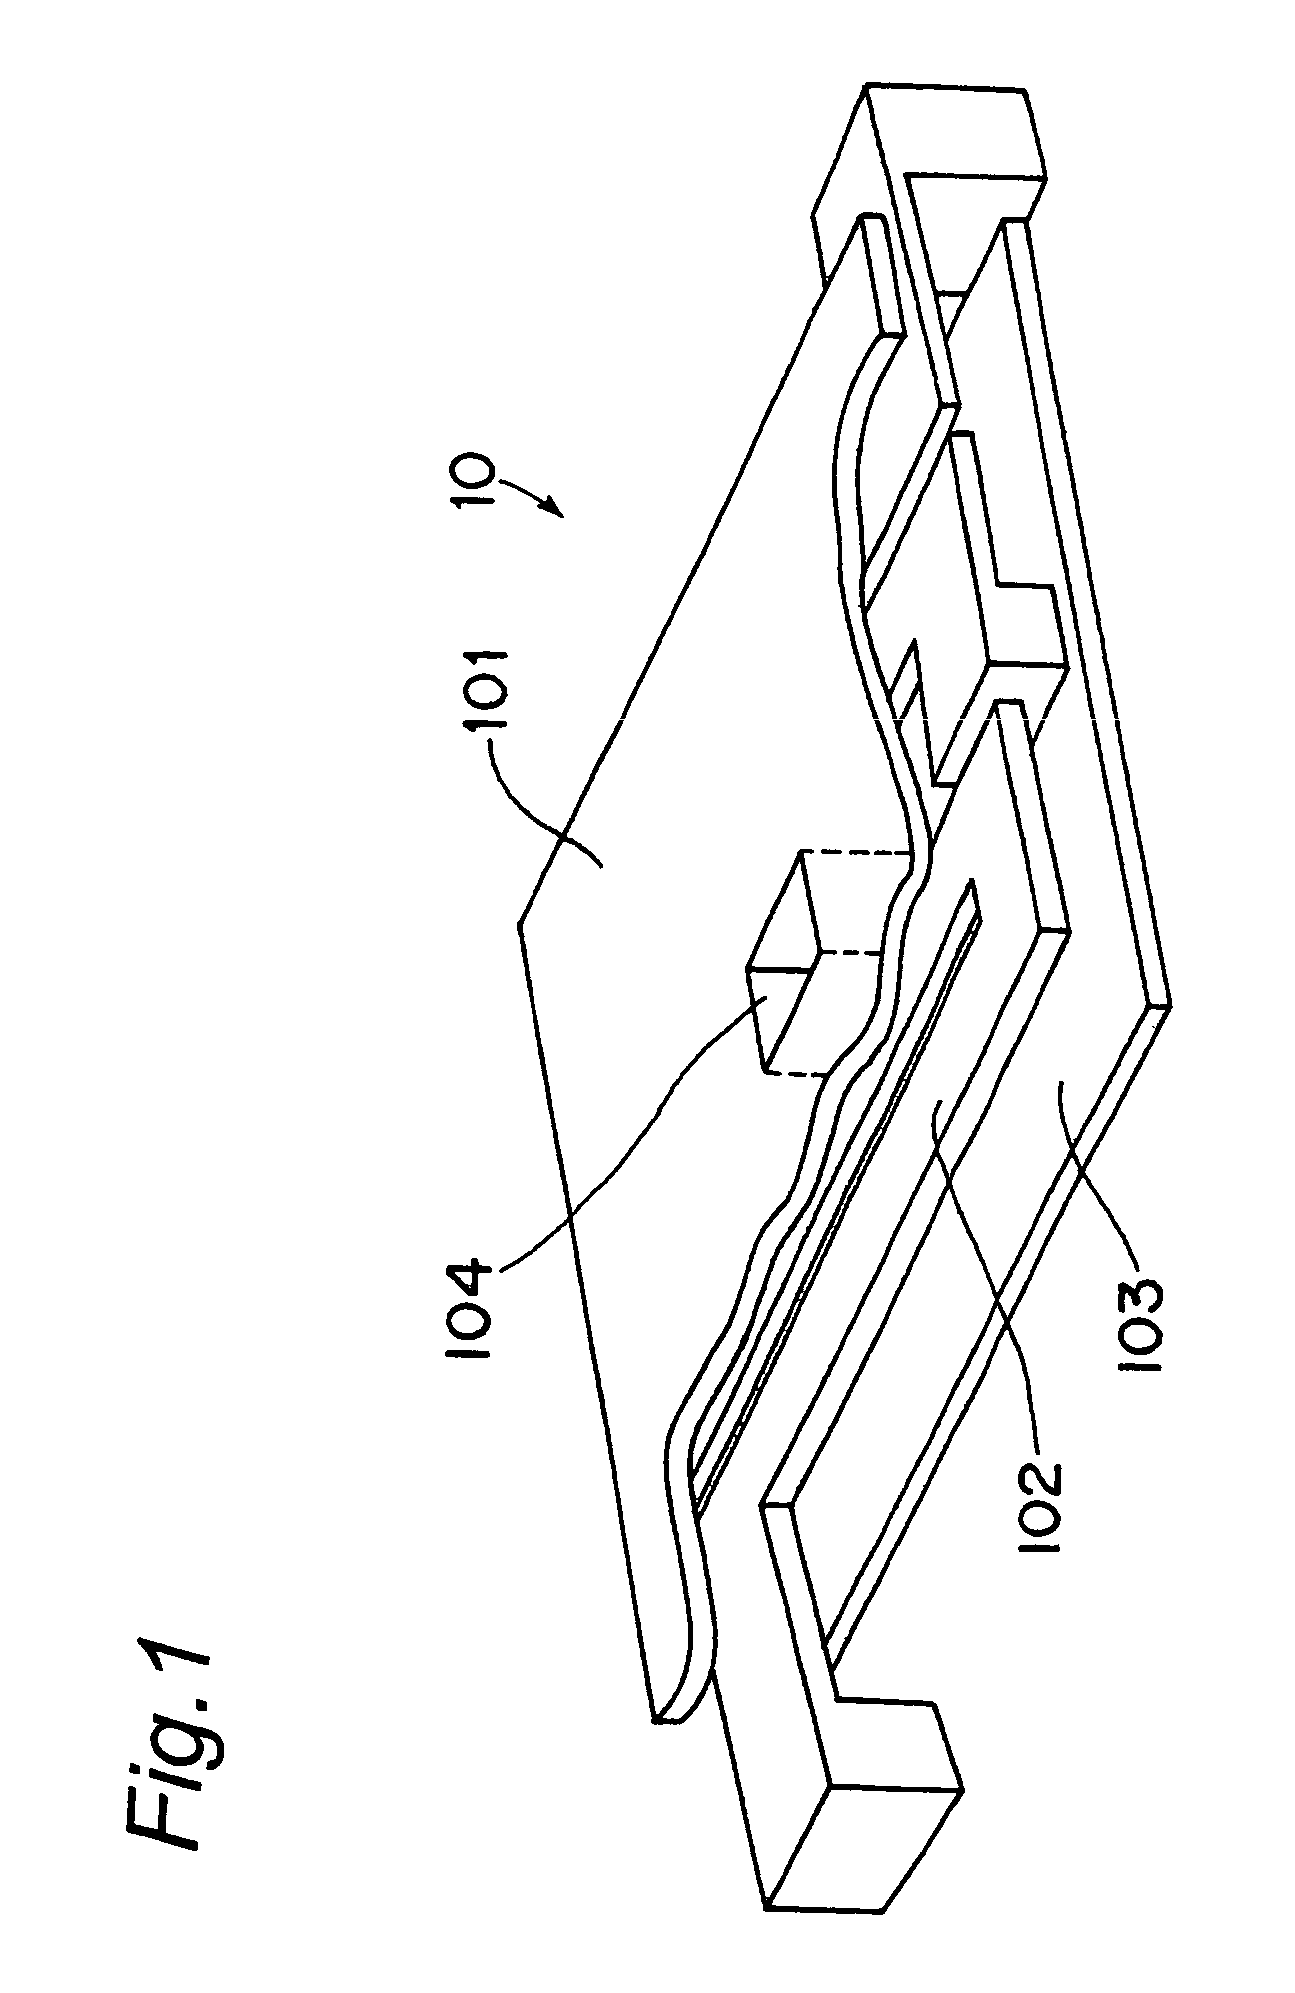 Thermal infrared detector and infrared focal plane array